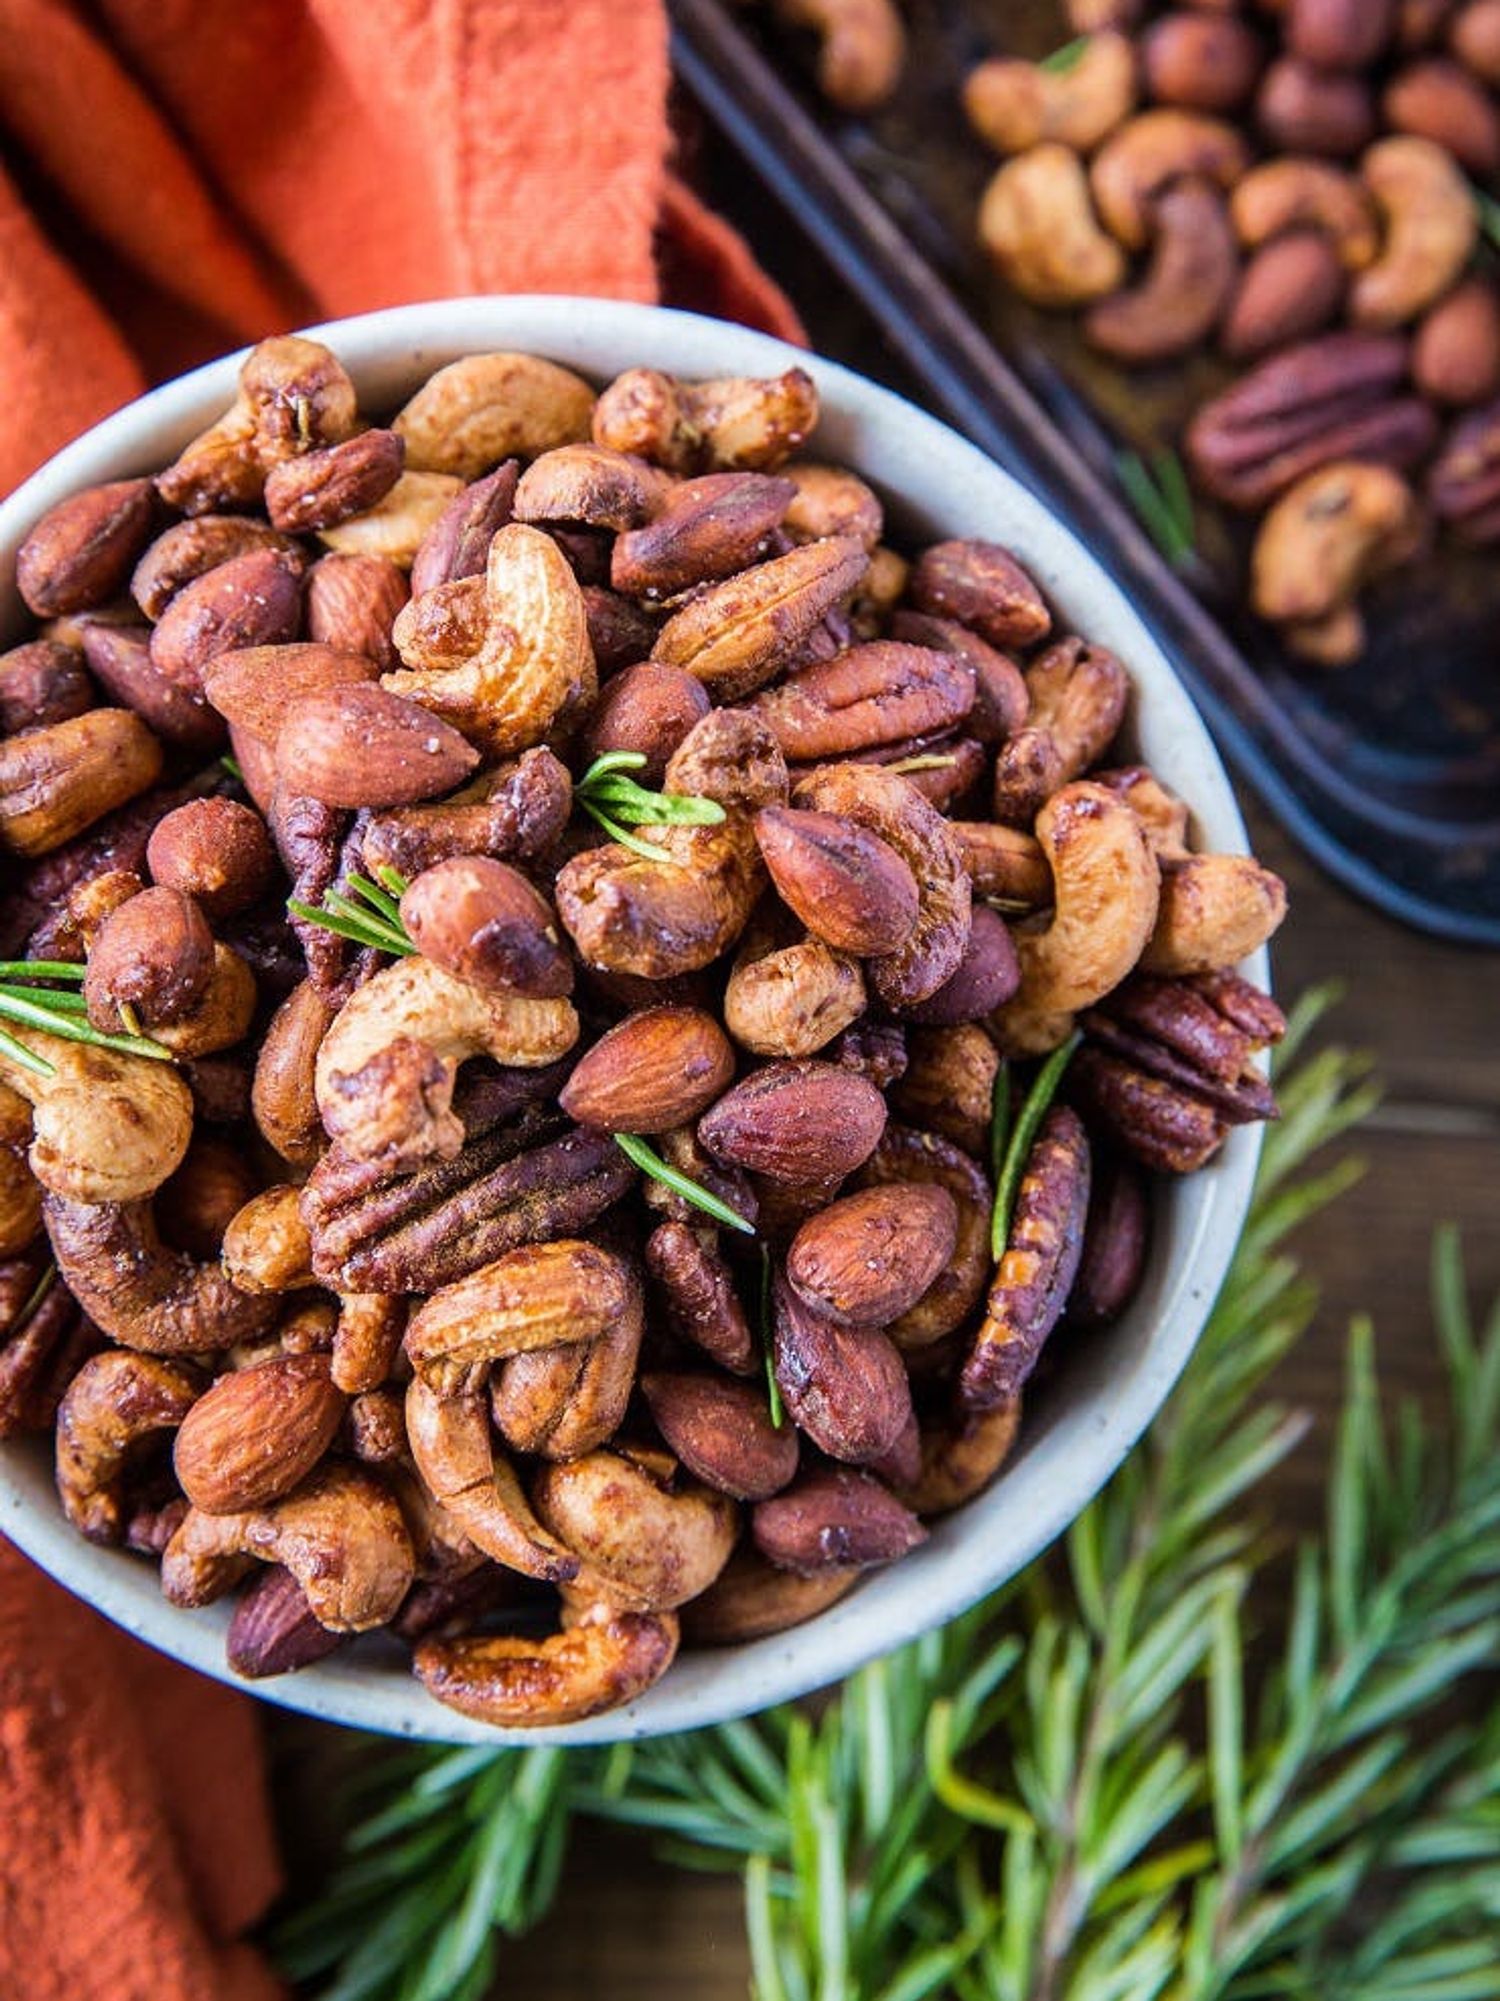 A bowl full of Maple Rosemary Roasted Nuts